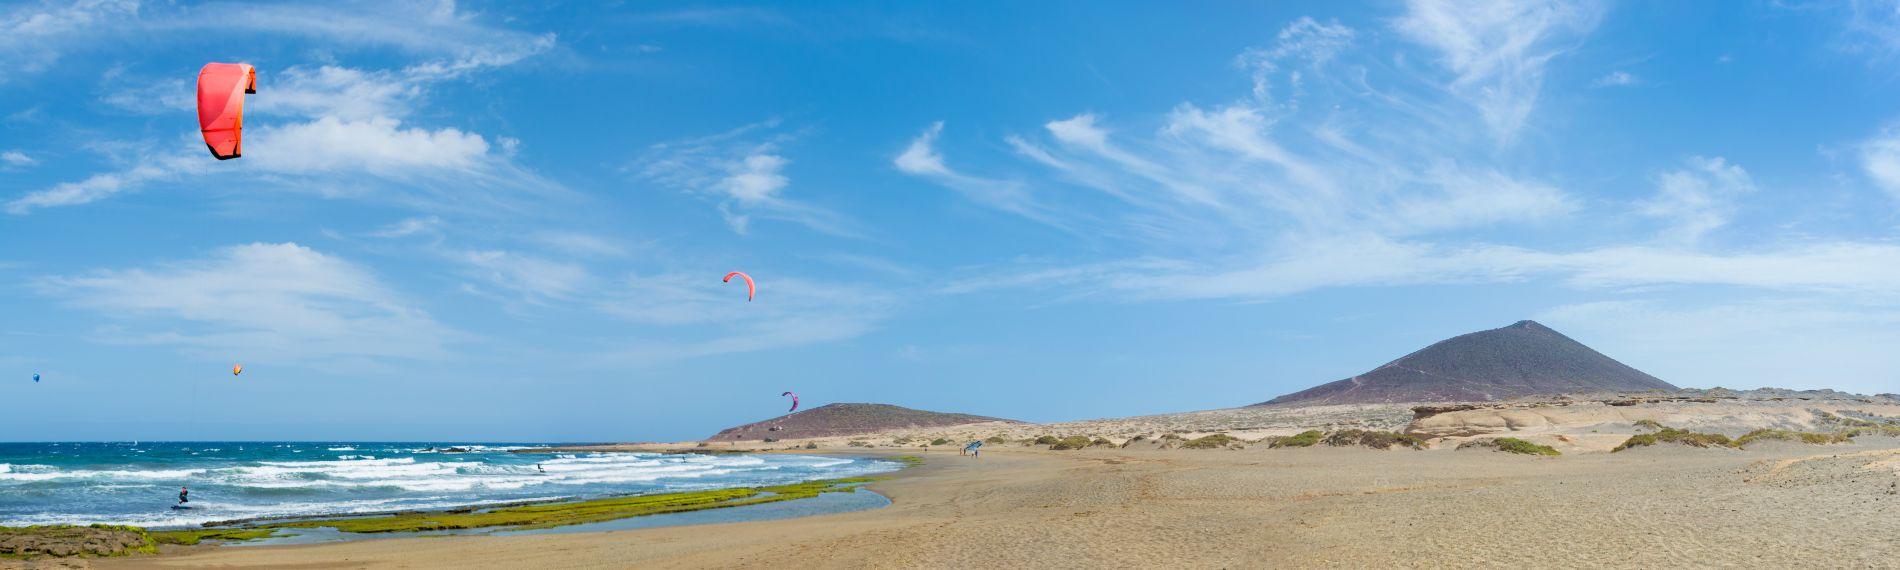 Kitesurfers at El Medano beach, a long, wide stretch of white sand with a view of Red Mountain (Montana Roja)